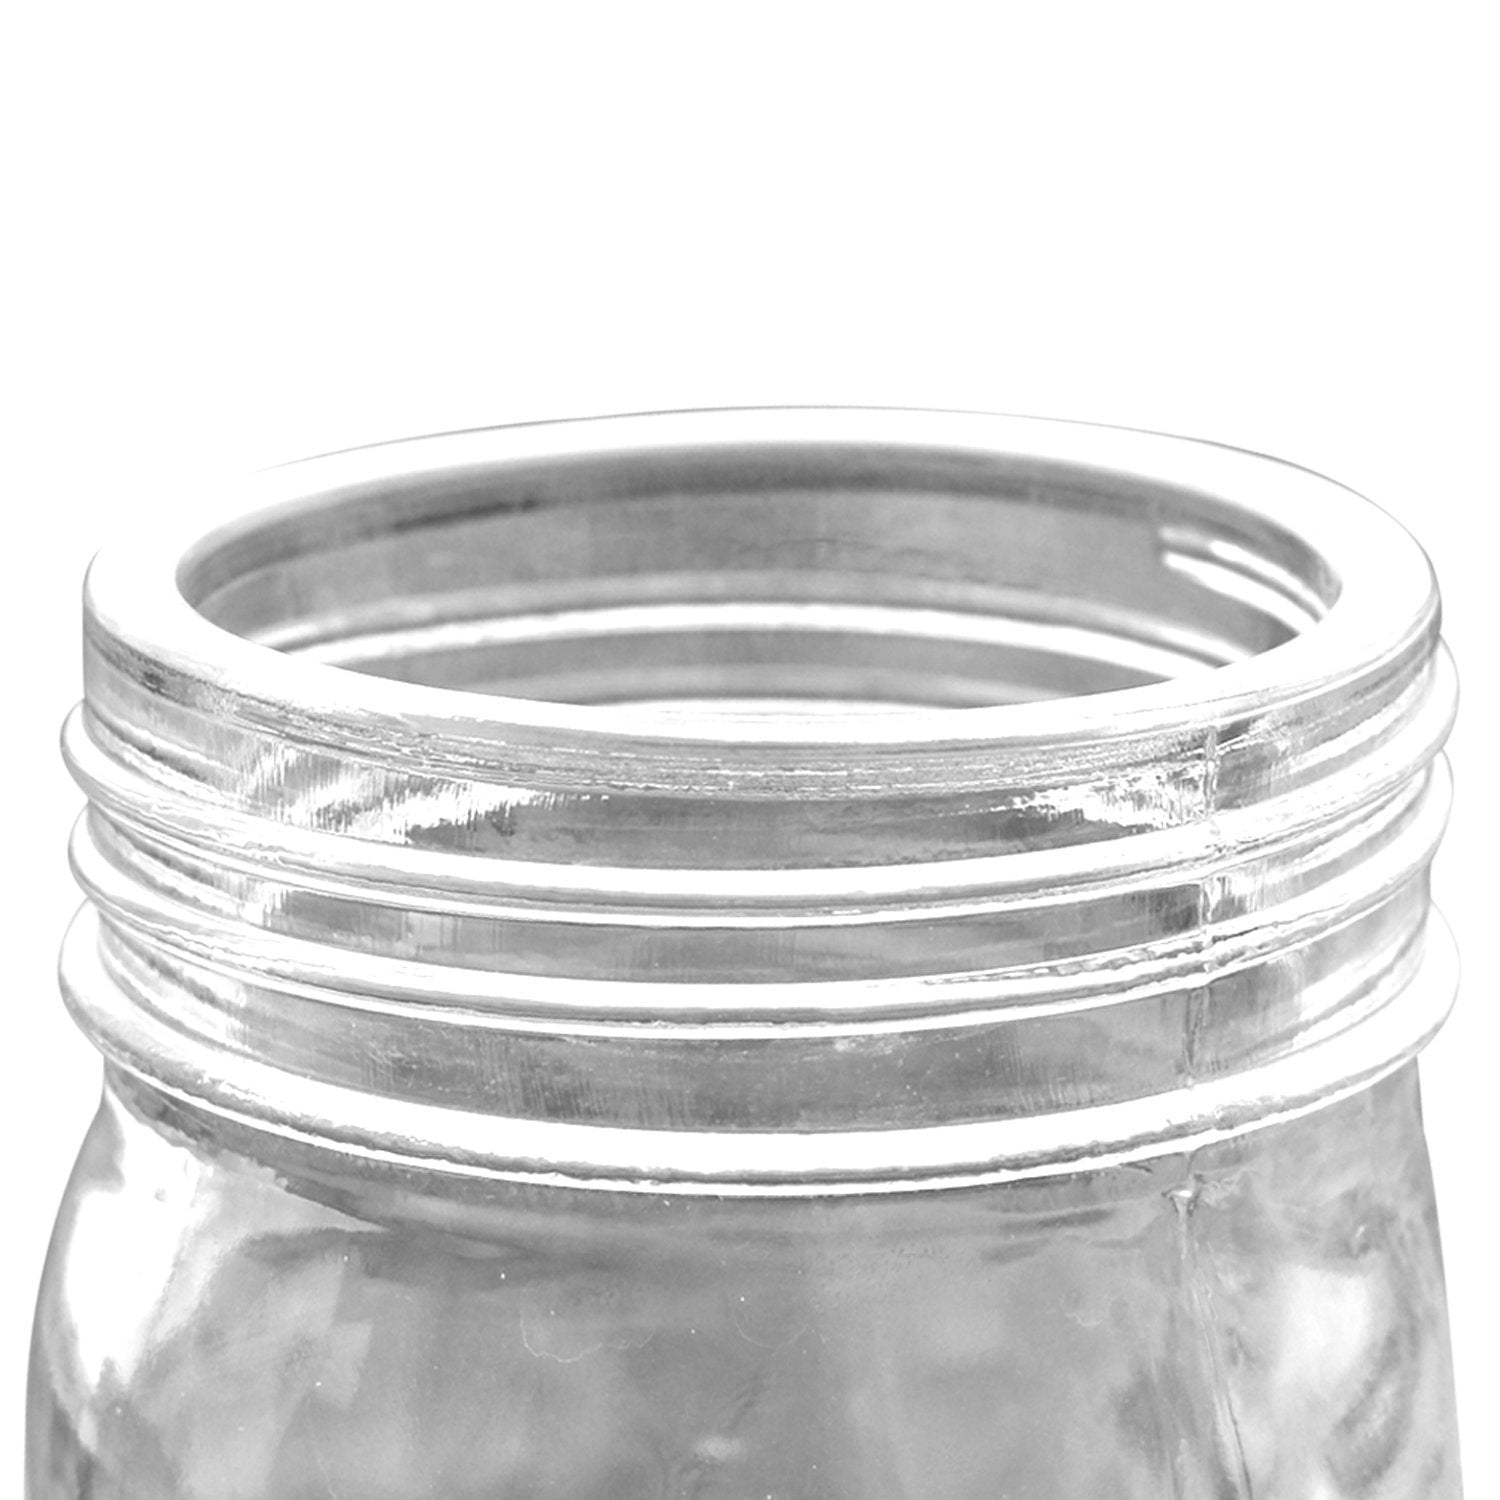 2376 Transparent Air Tight Food Storage Container Jar Dispenser for Kitchen - SkyShopy